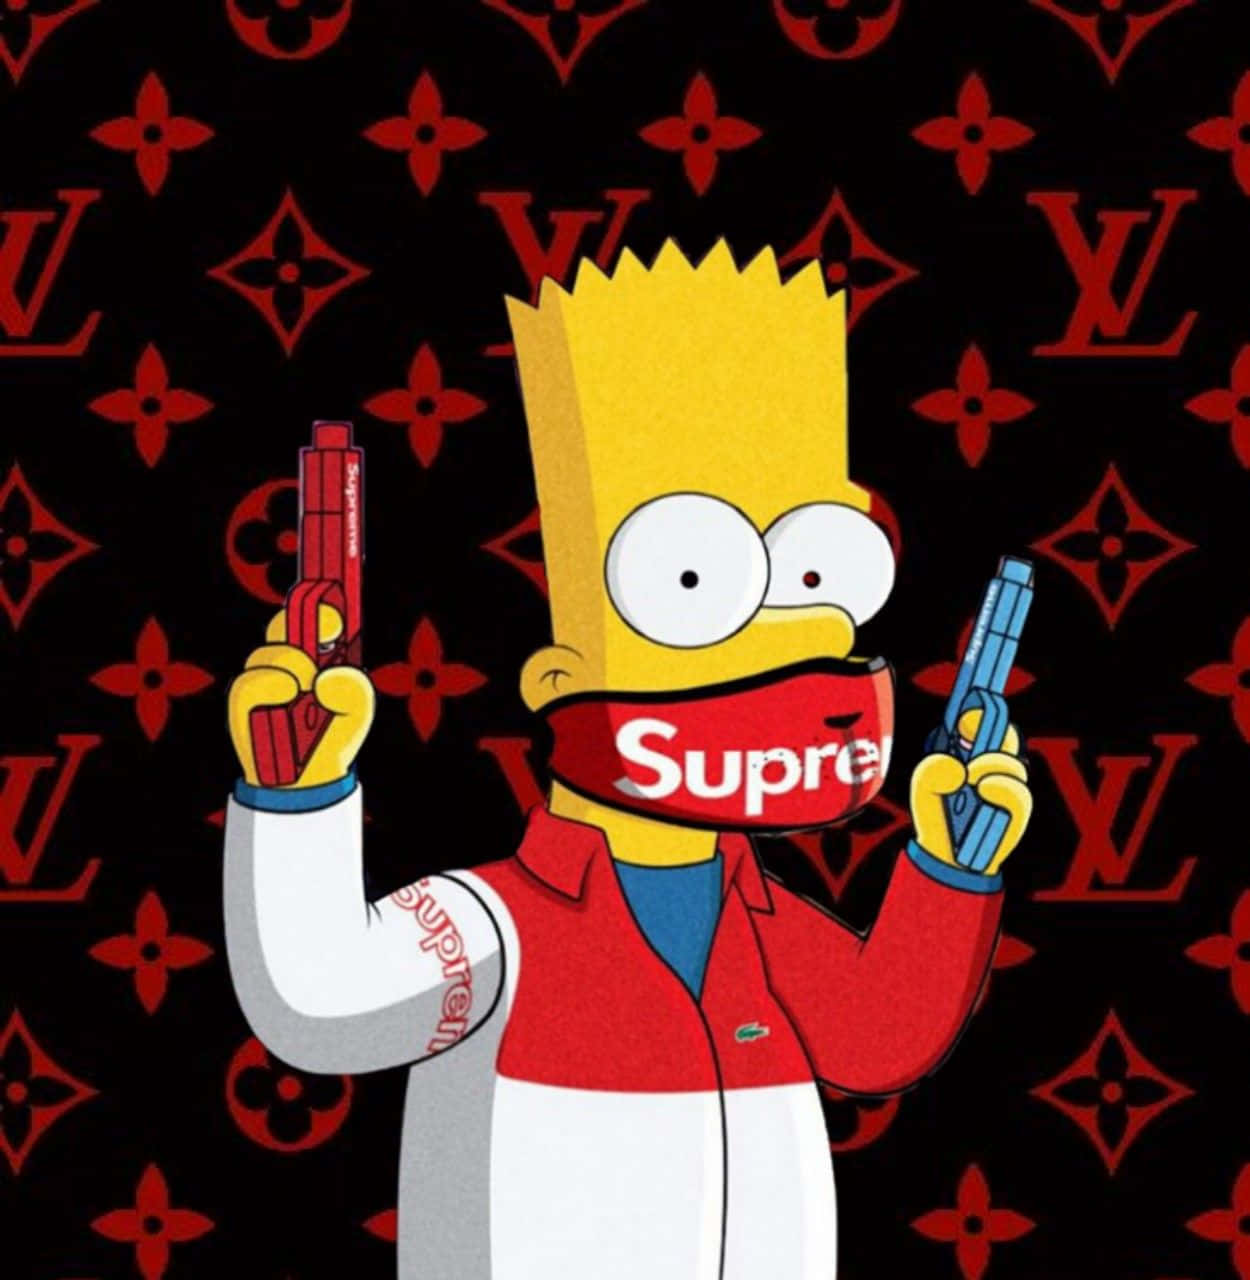 Download The Stylish Bart Simpson in Supreme Style Drip Art Wallpaper, Wallpapers.com in 2023